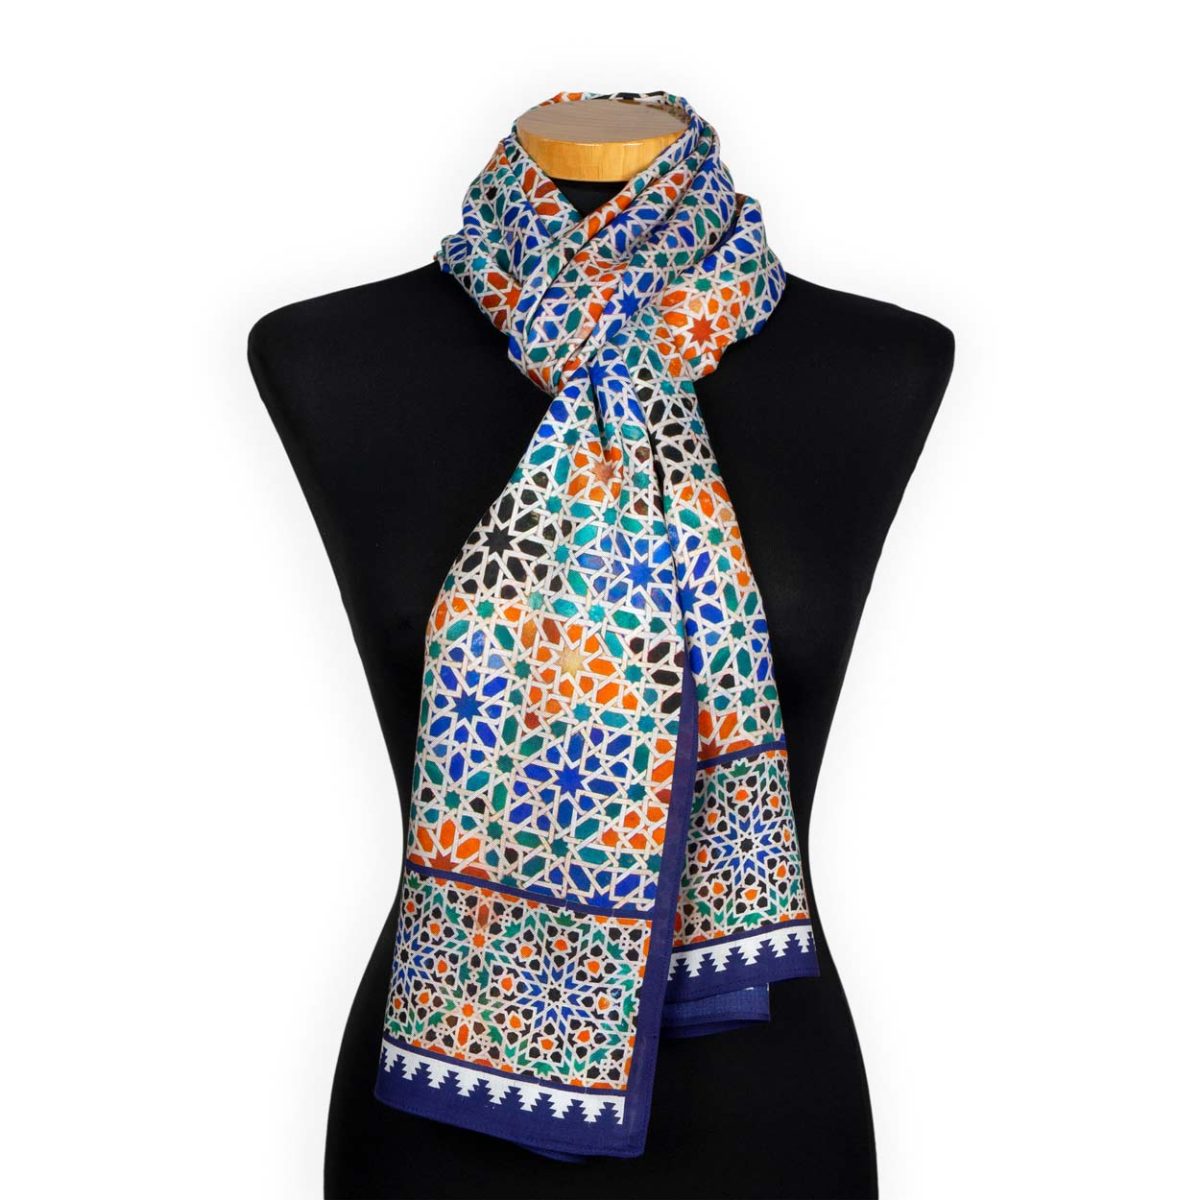 Large neckerchief for women and men featuring Islamic Pattern